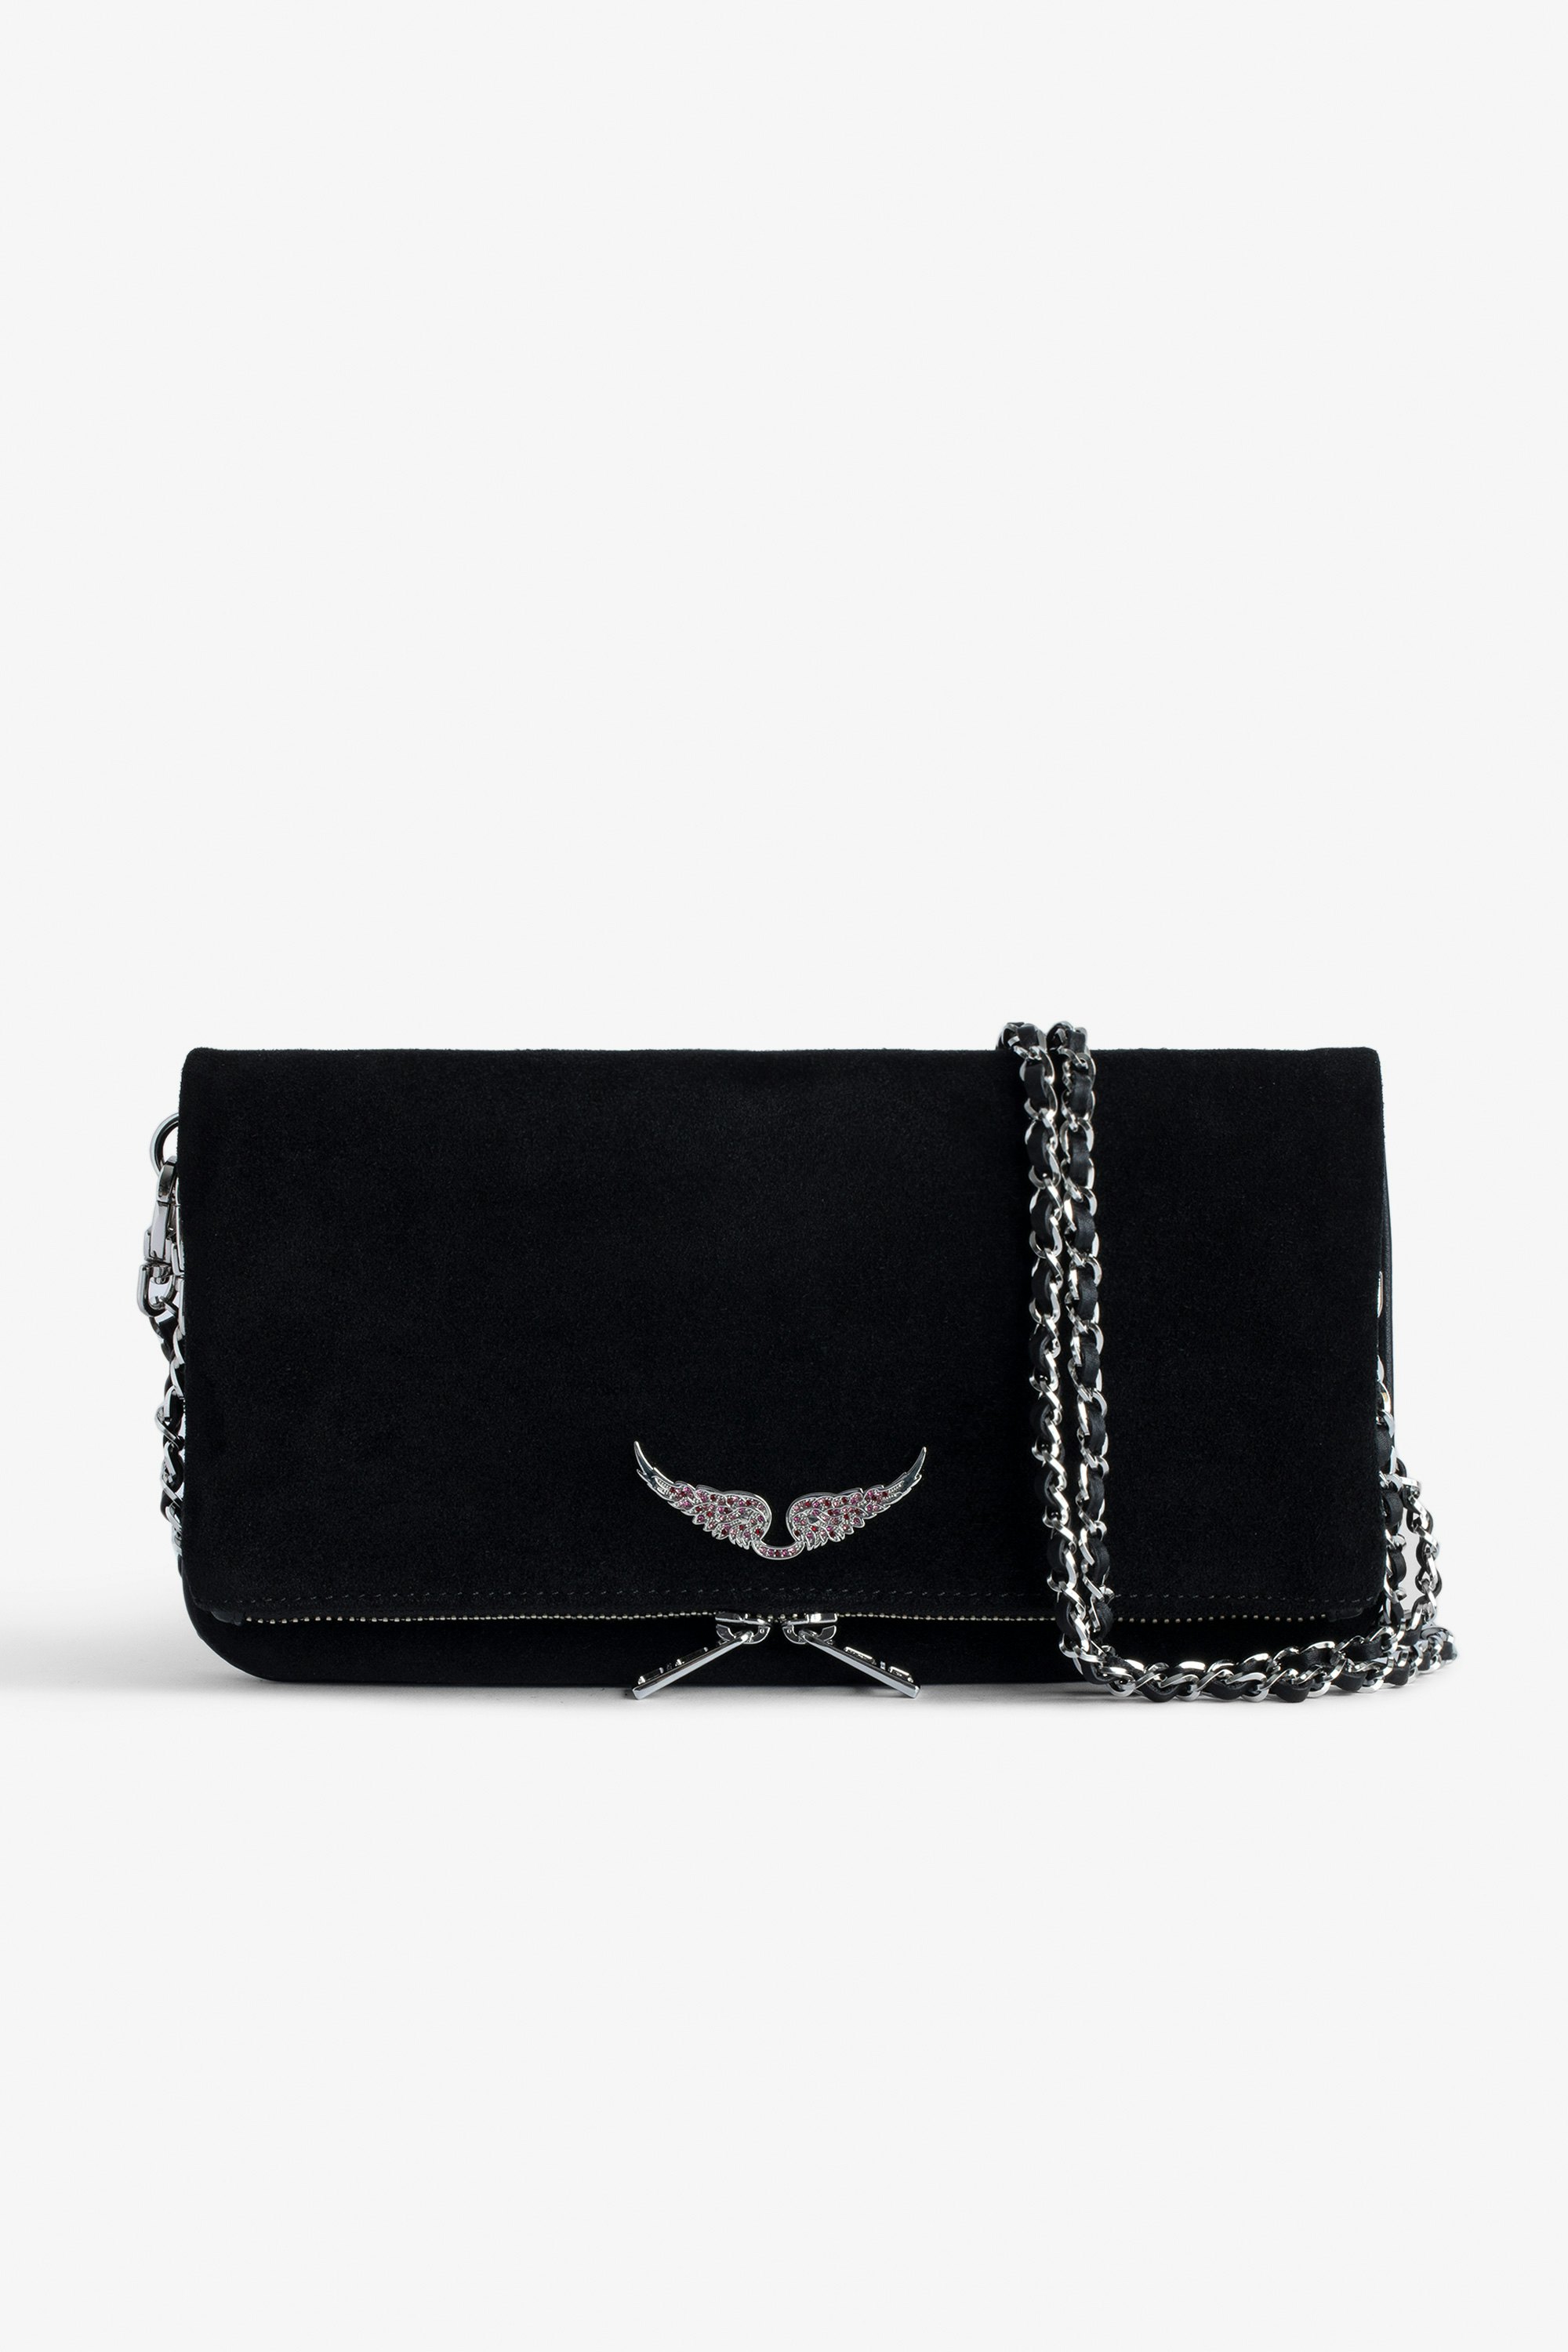 Rock Suede Clutch - Rock black suede clutch bag with double leather and metal chain strap.